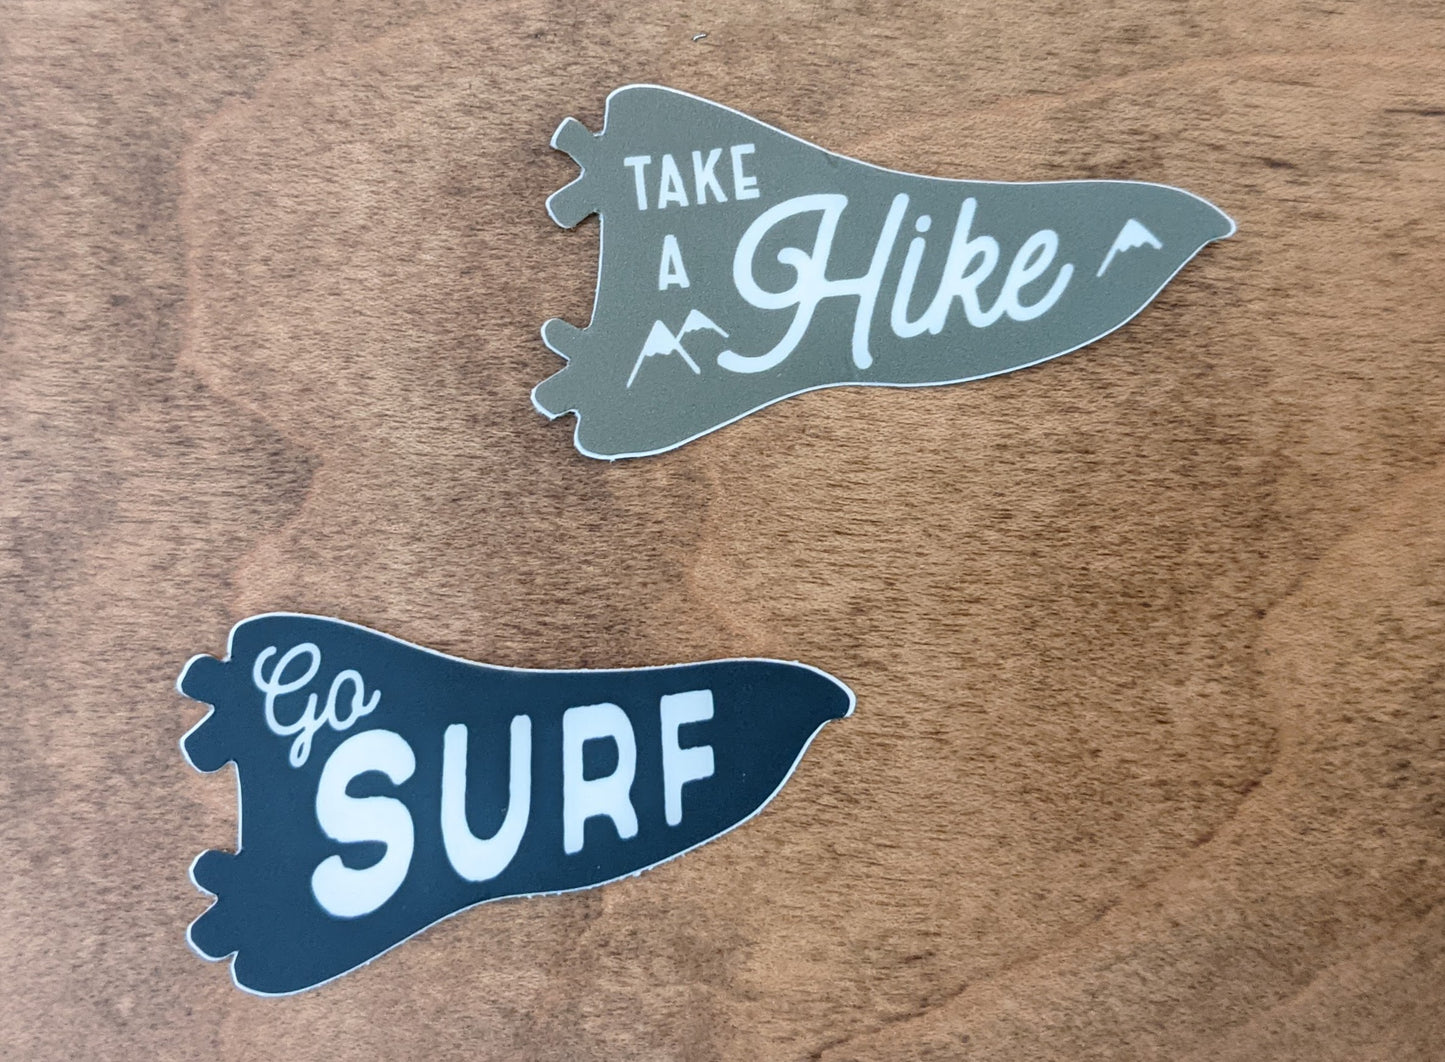 Mini pennant stickers reading Take a Hike in green and Go Surf in Navy by Pau Hana Designs